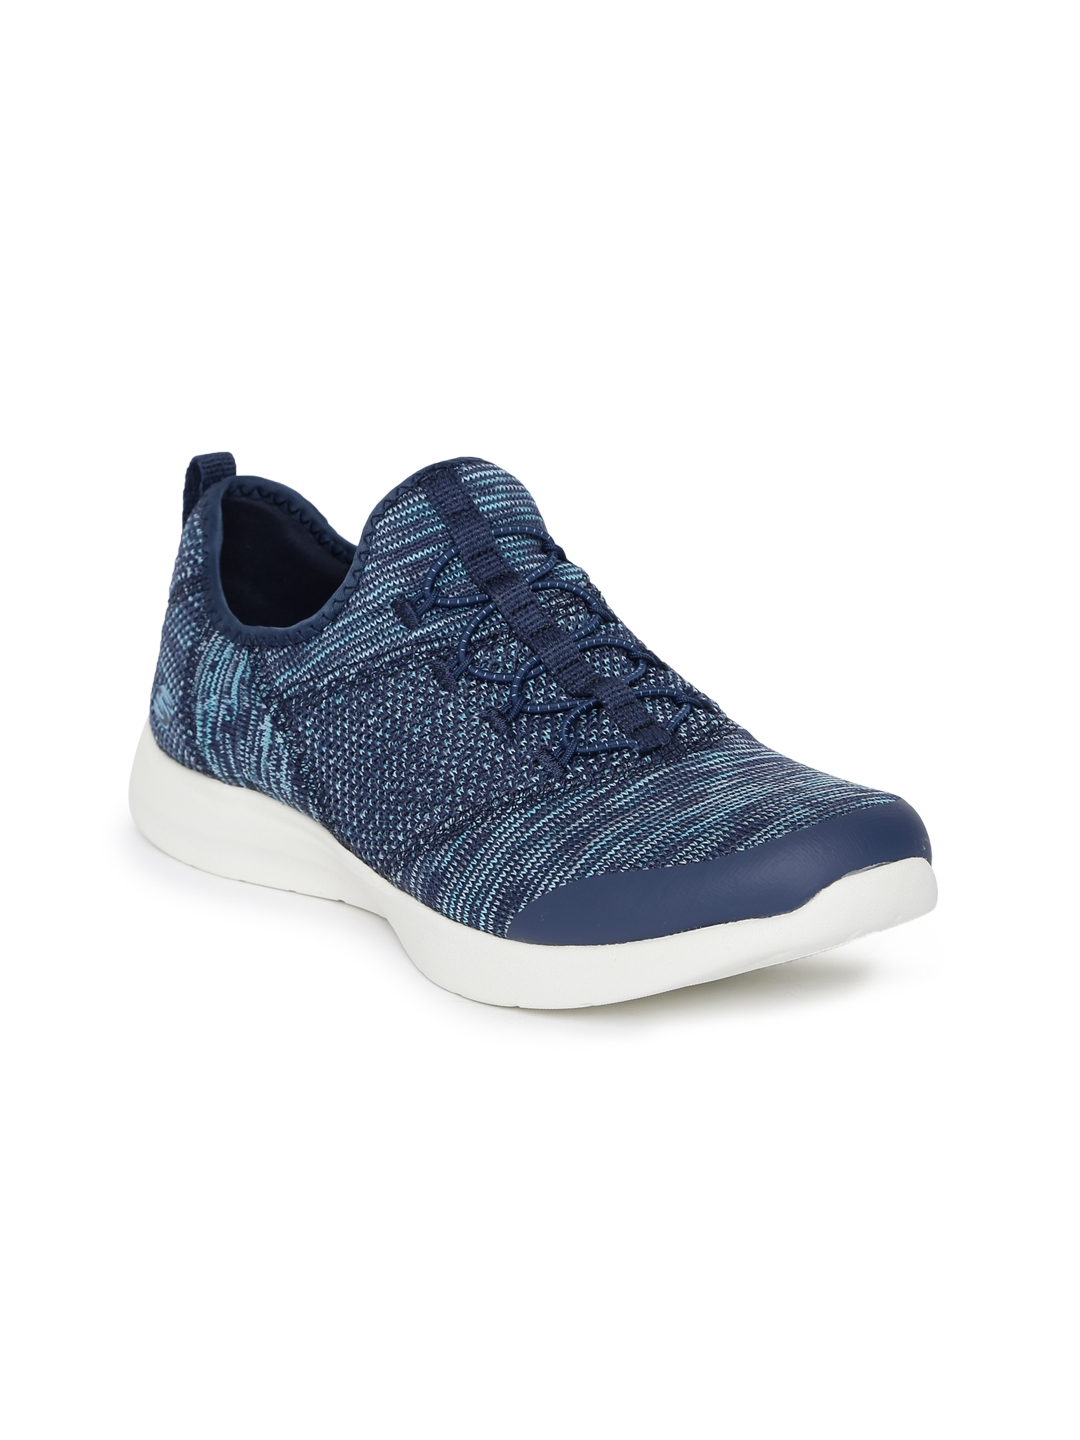 Blue Sneakers - Casual Shoes for Women 